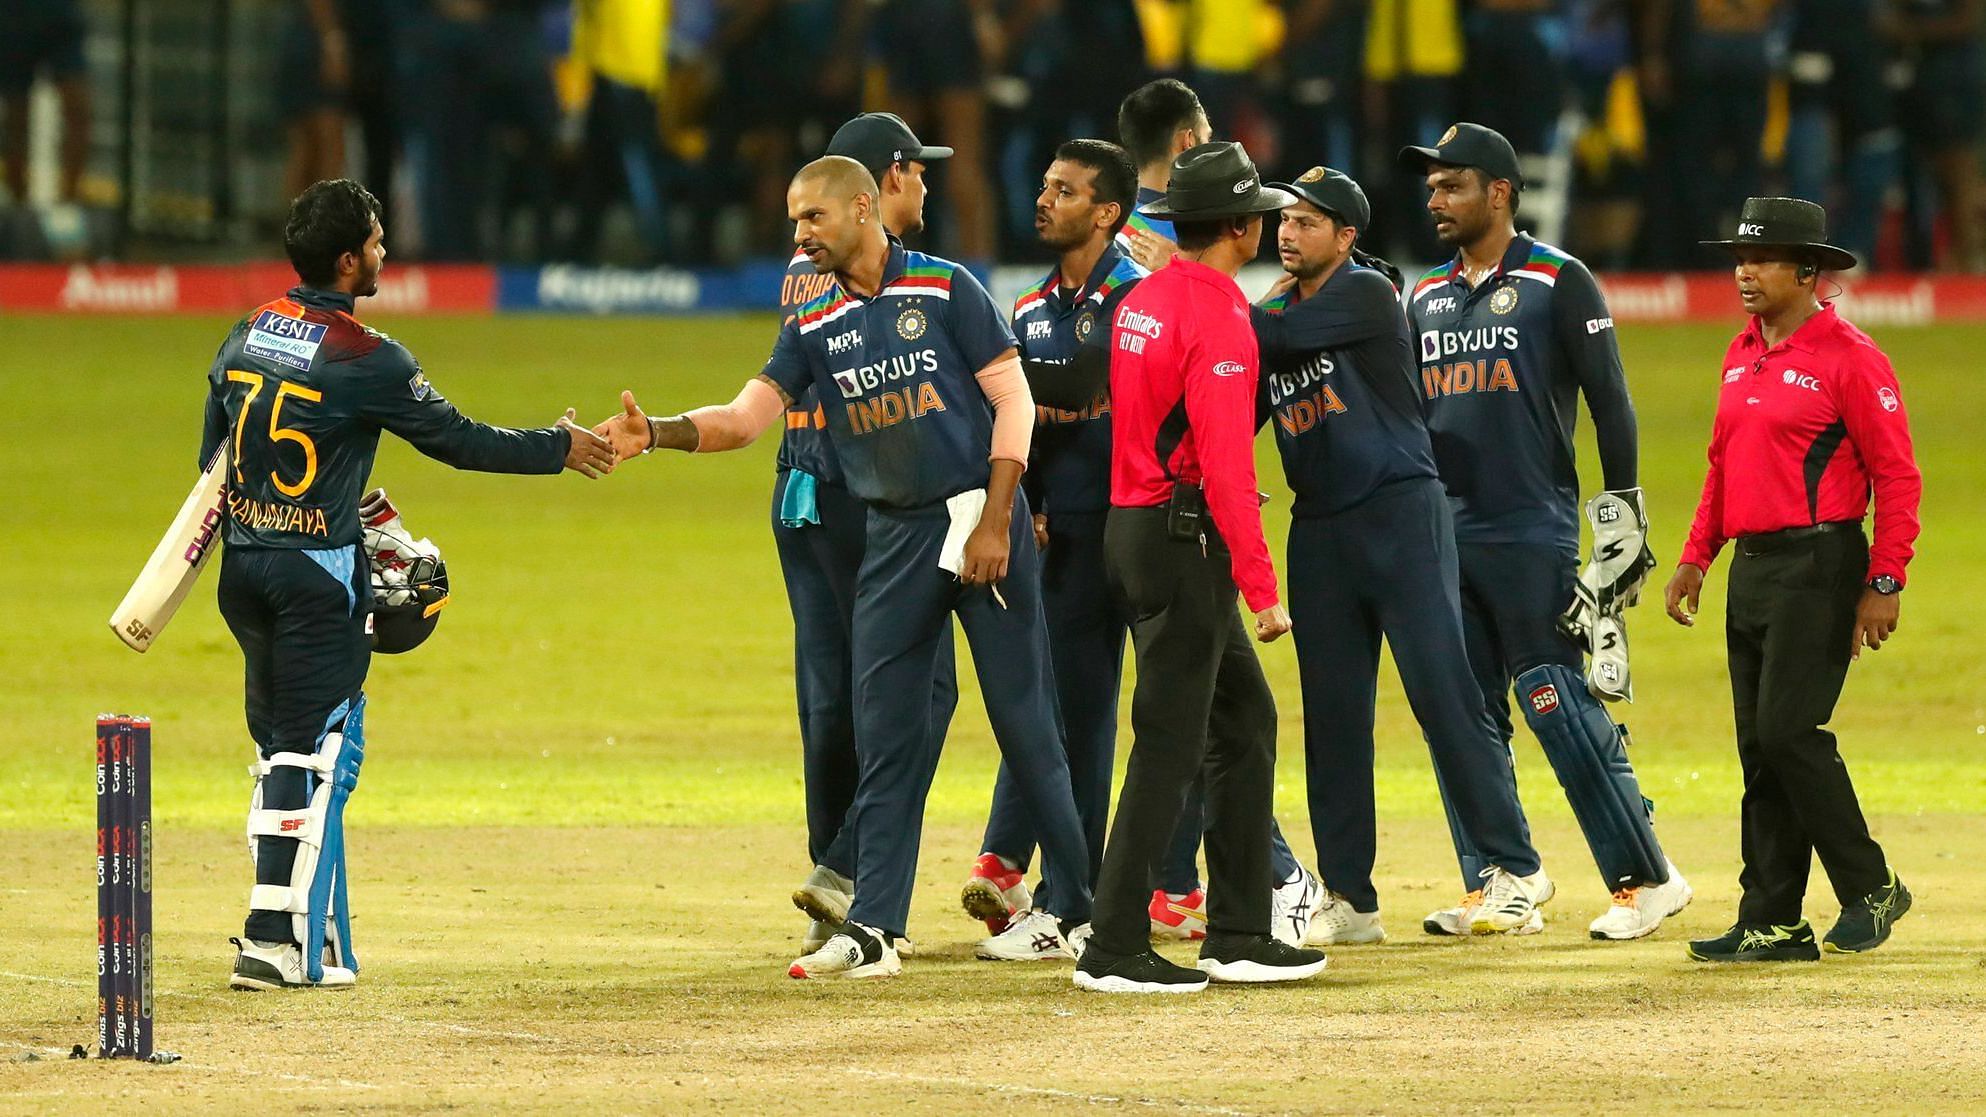 <div class="paragraphs"><p>A depleted India lost by 4 wickets in the second T20I against SL in Colombo on Wednesday.&nbsp;&nbsp;</p></div>